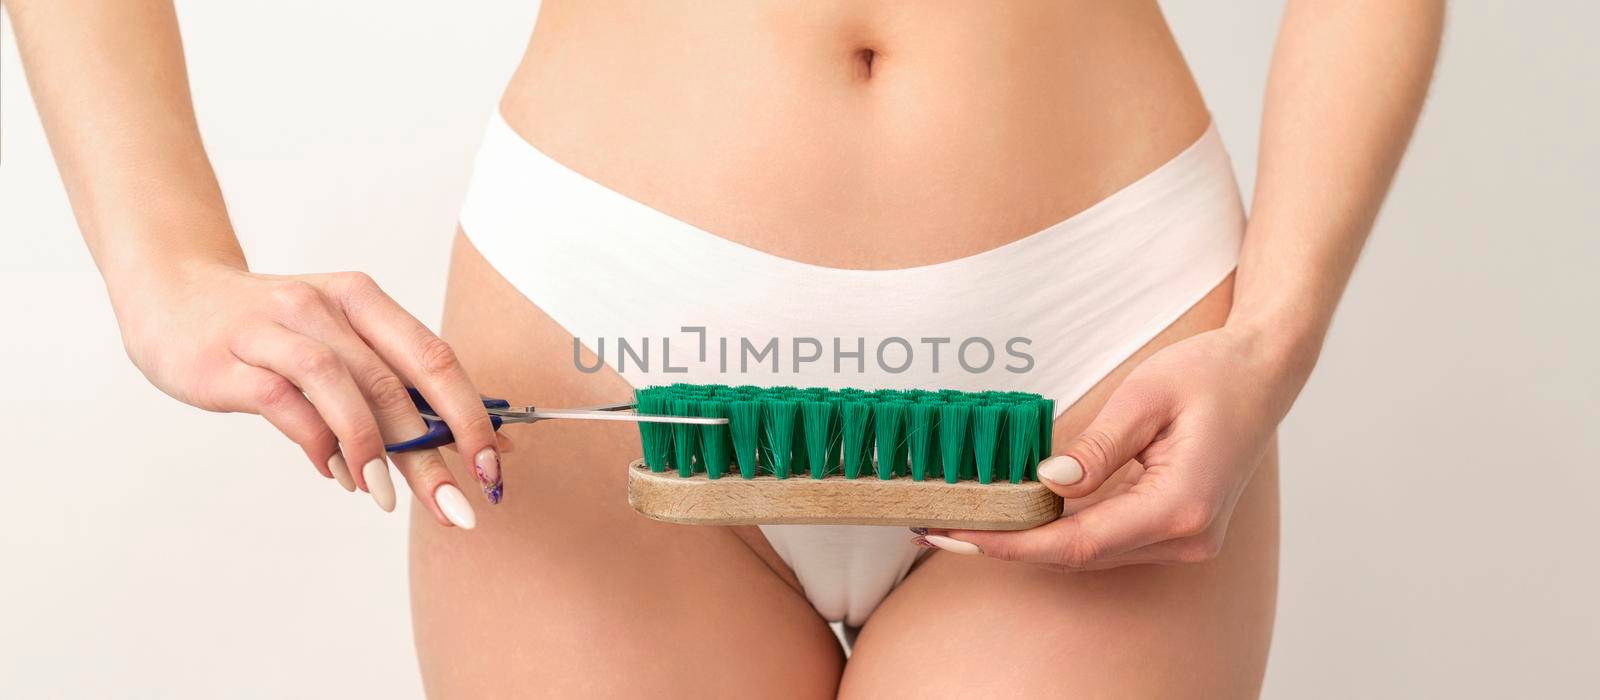 Epilation concept. A young caucasian woman wears white panties is cutting a cleaning brush with scissors standing on white background